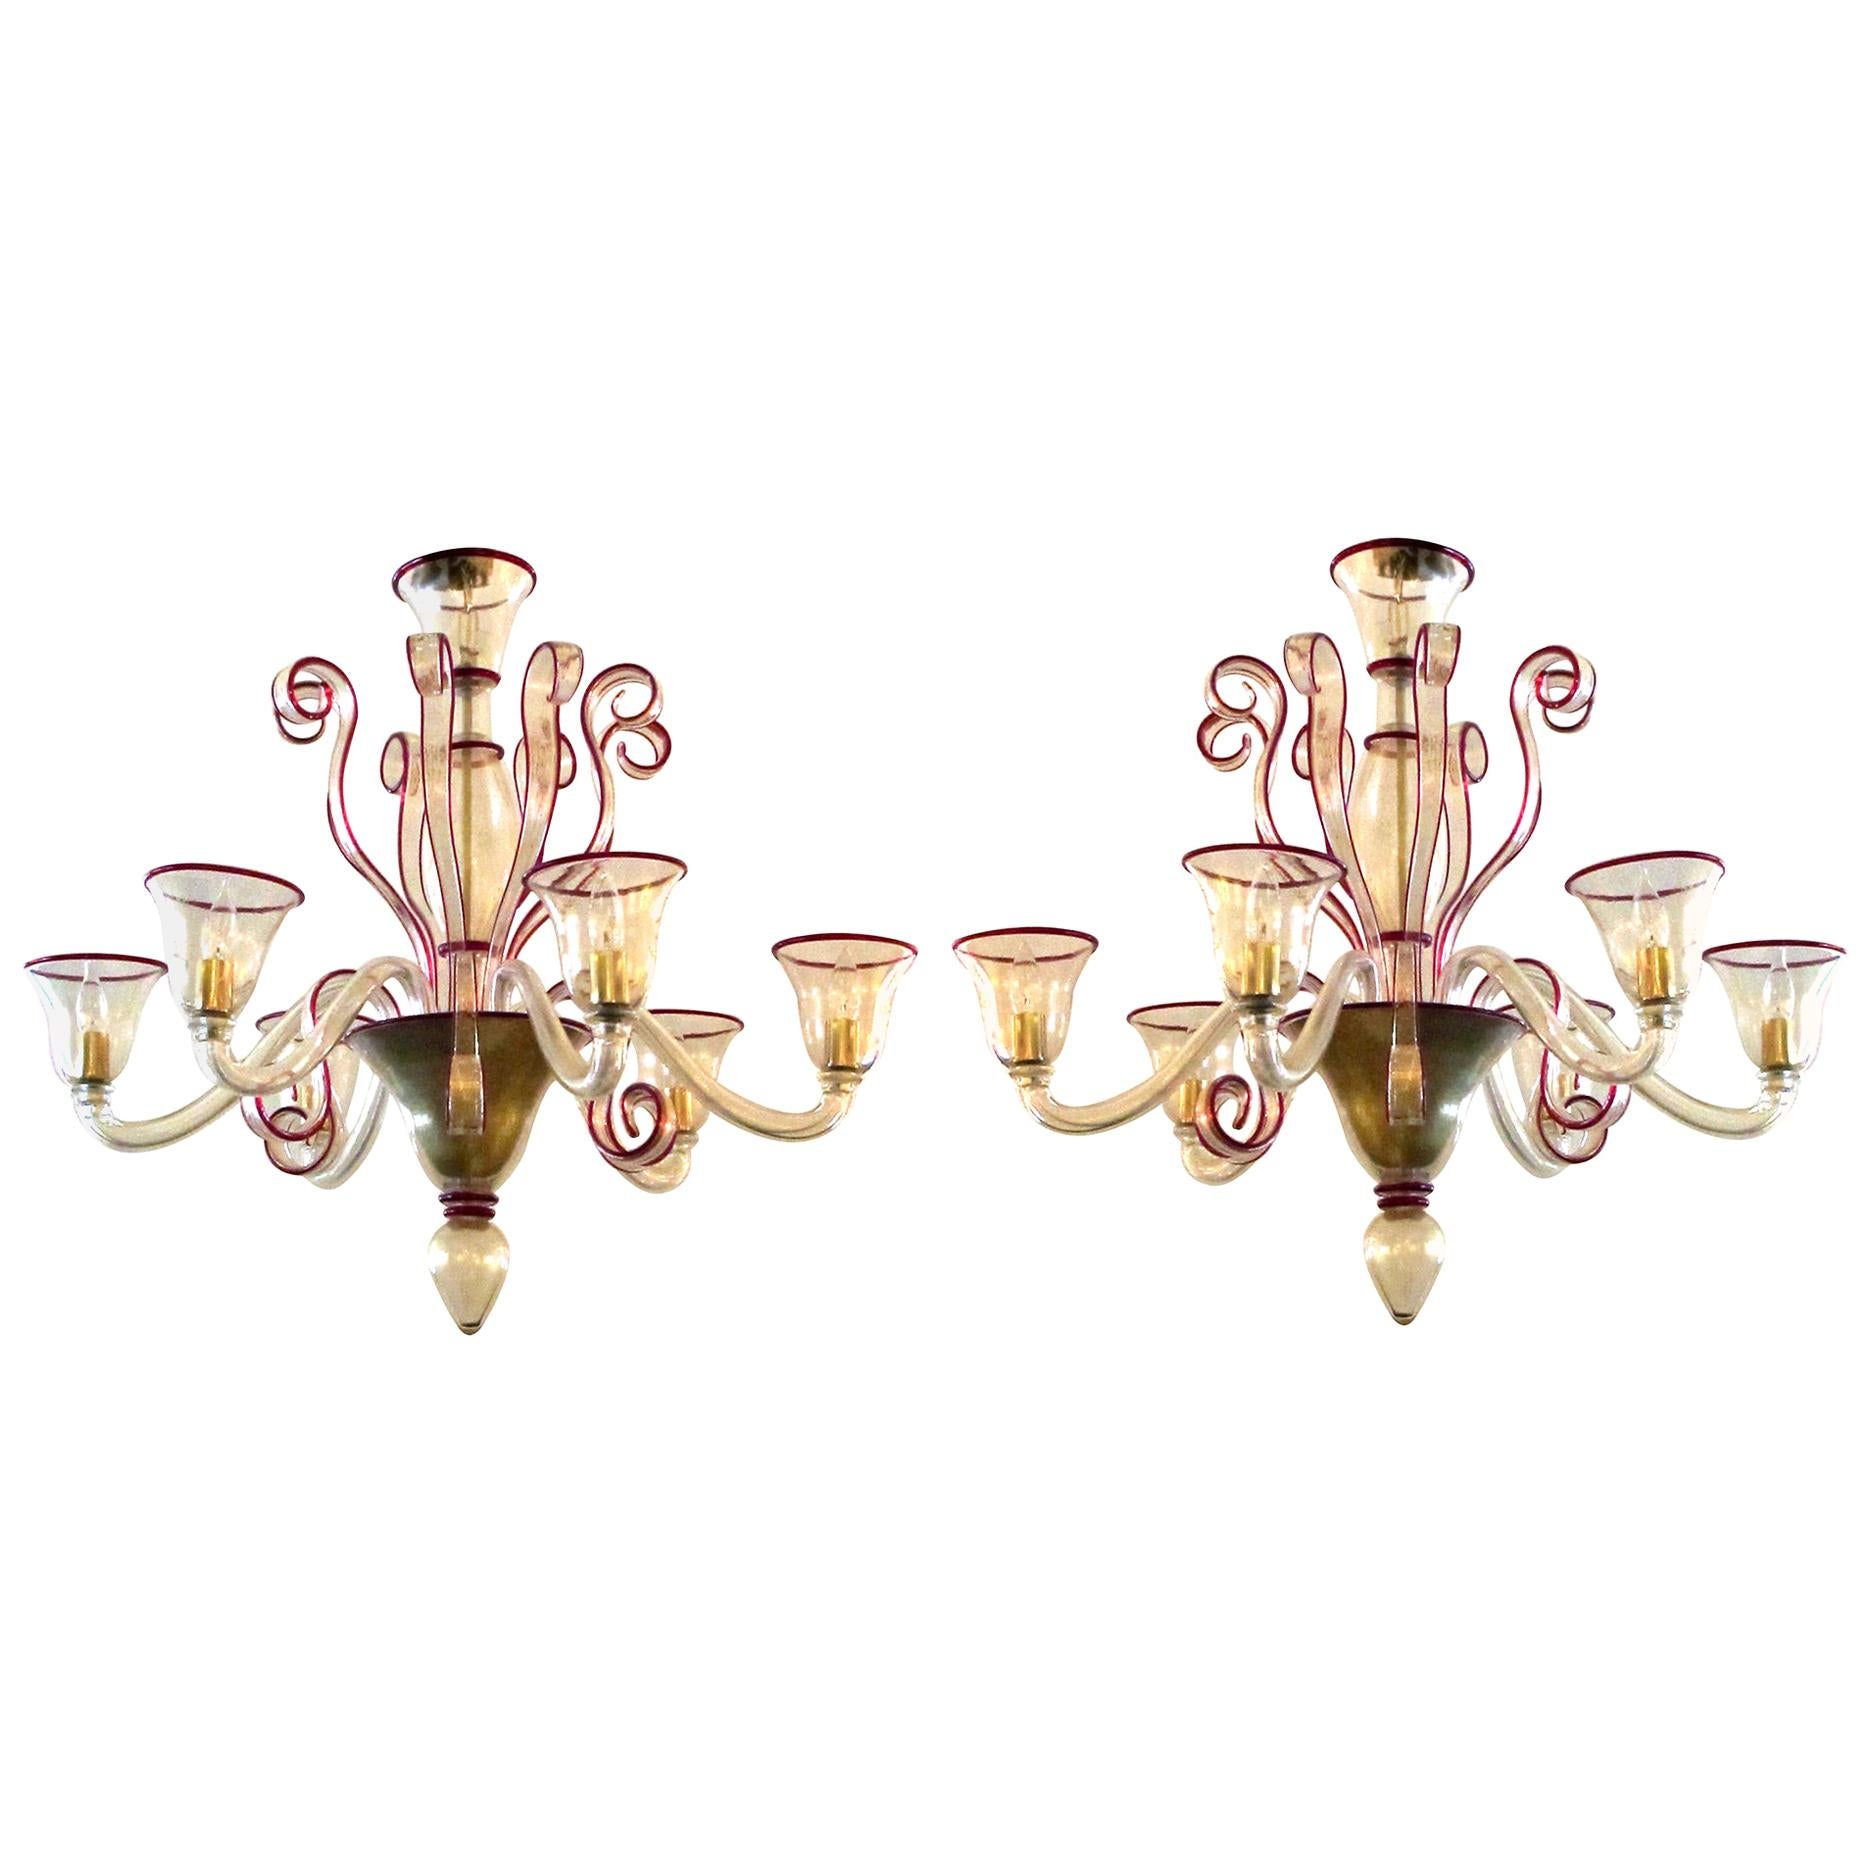 Chic Pair of Murano Gold-Aventurine 6-Light Chandeliers with Ruby-Red Edging